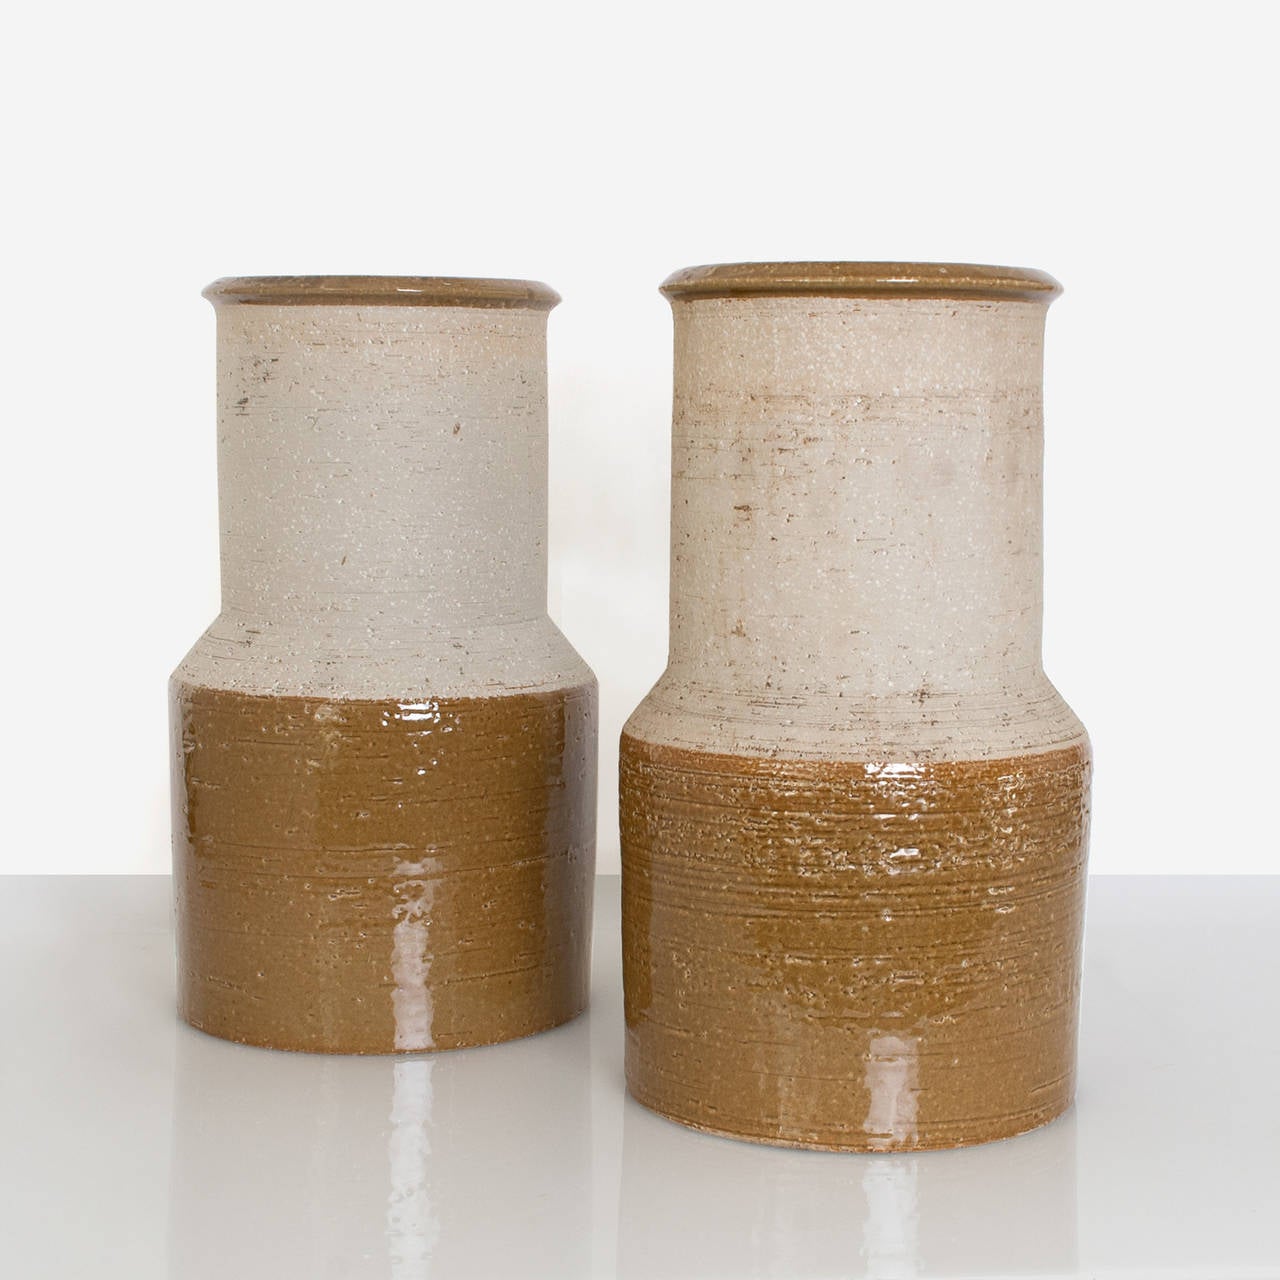 Pair of Scandinavian Modern large minamalist form studio vases by Hertha Bengtsson for Rorstrand, Sweden. These vase are of charmotte clay and are partially glazed on lower half and rim. Designed circa 1962. May be purchased separately. 
 
H: 15